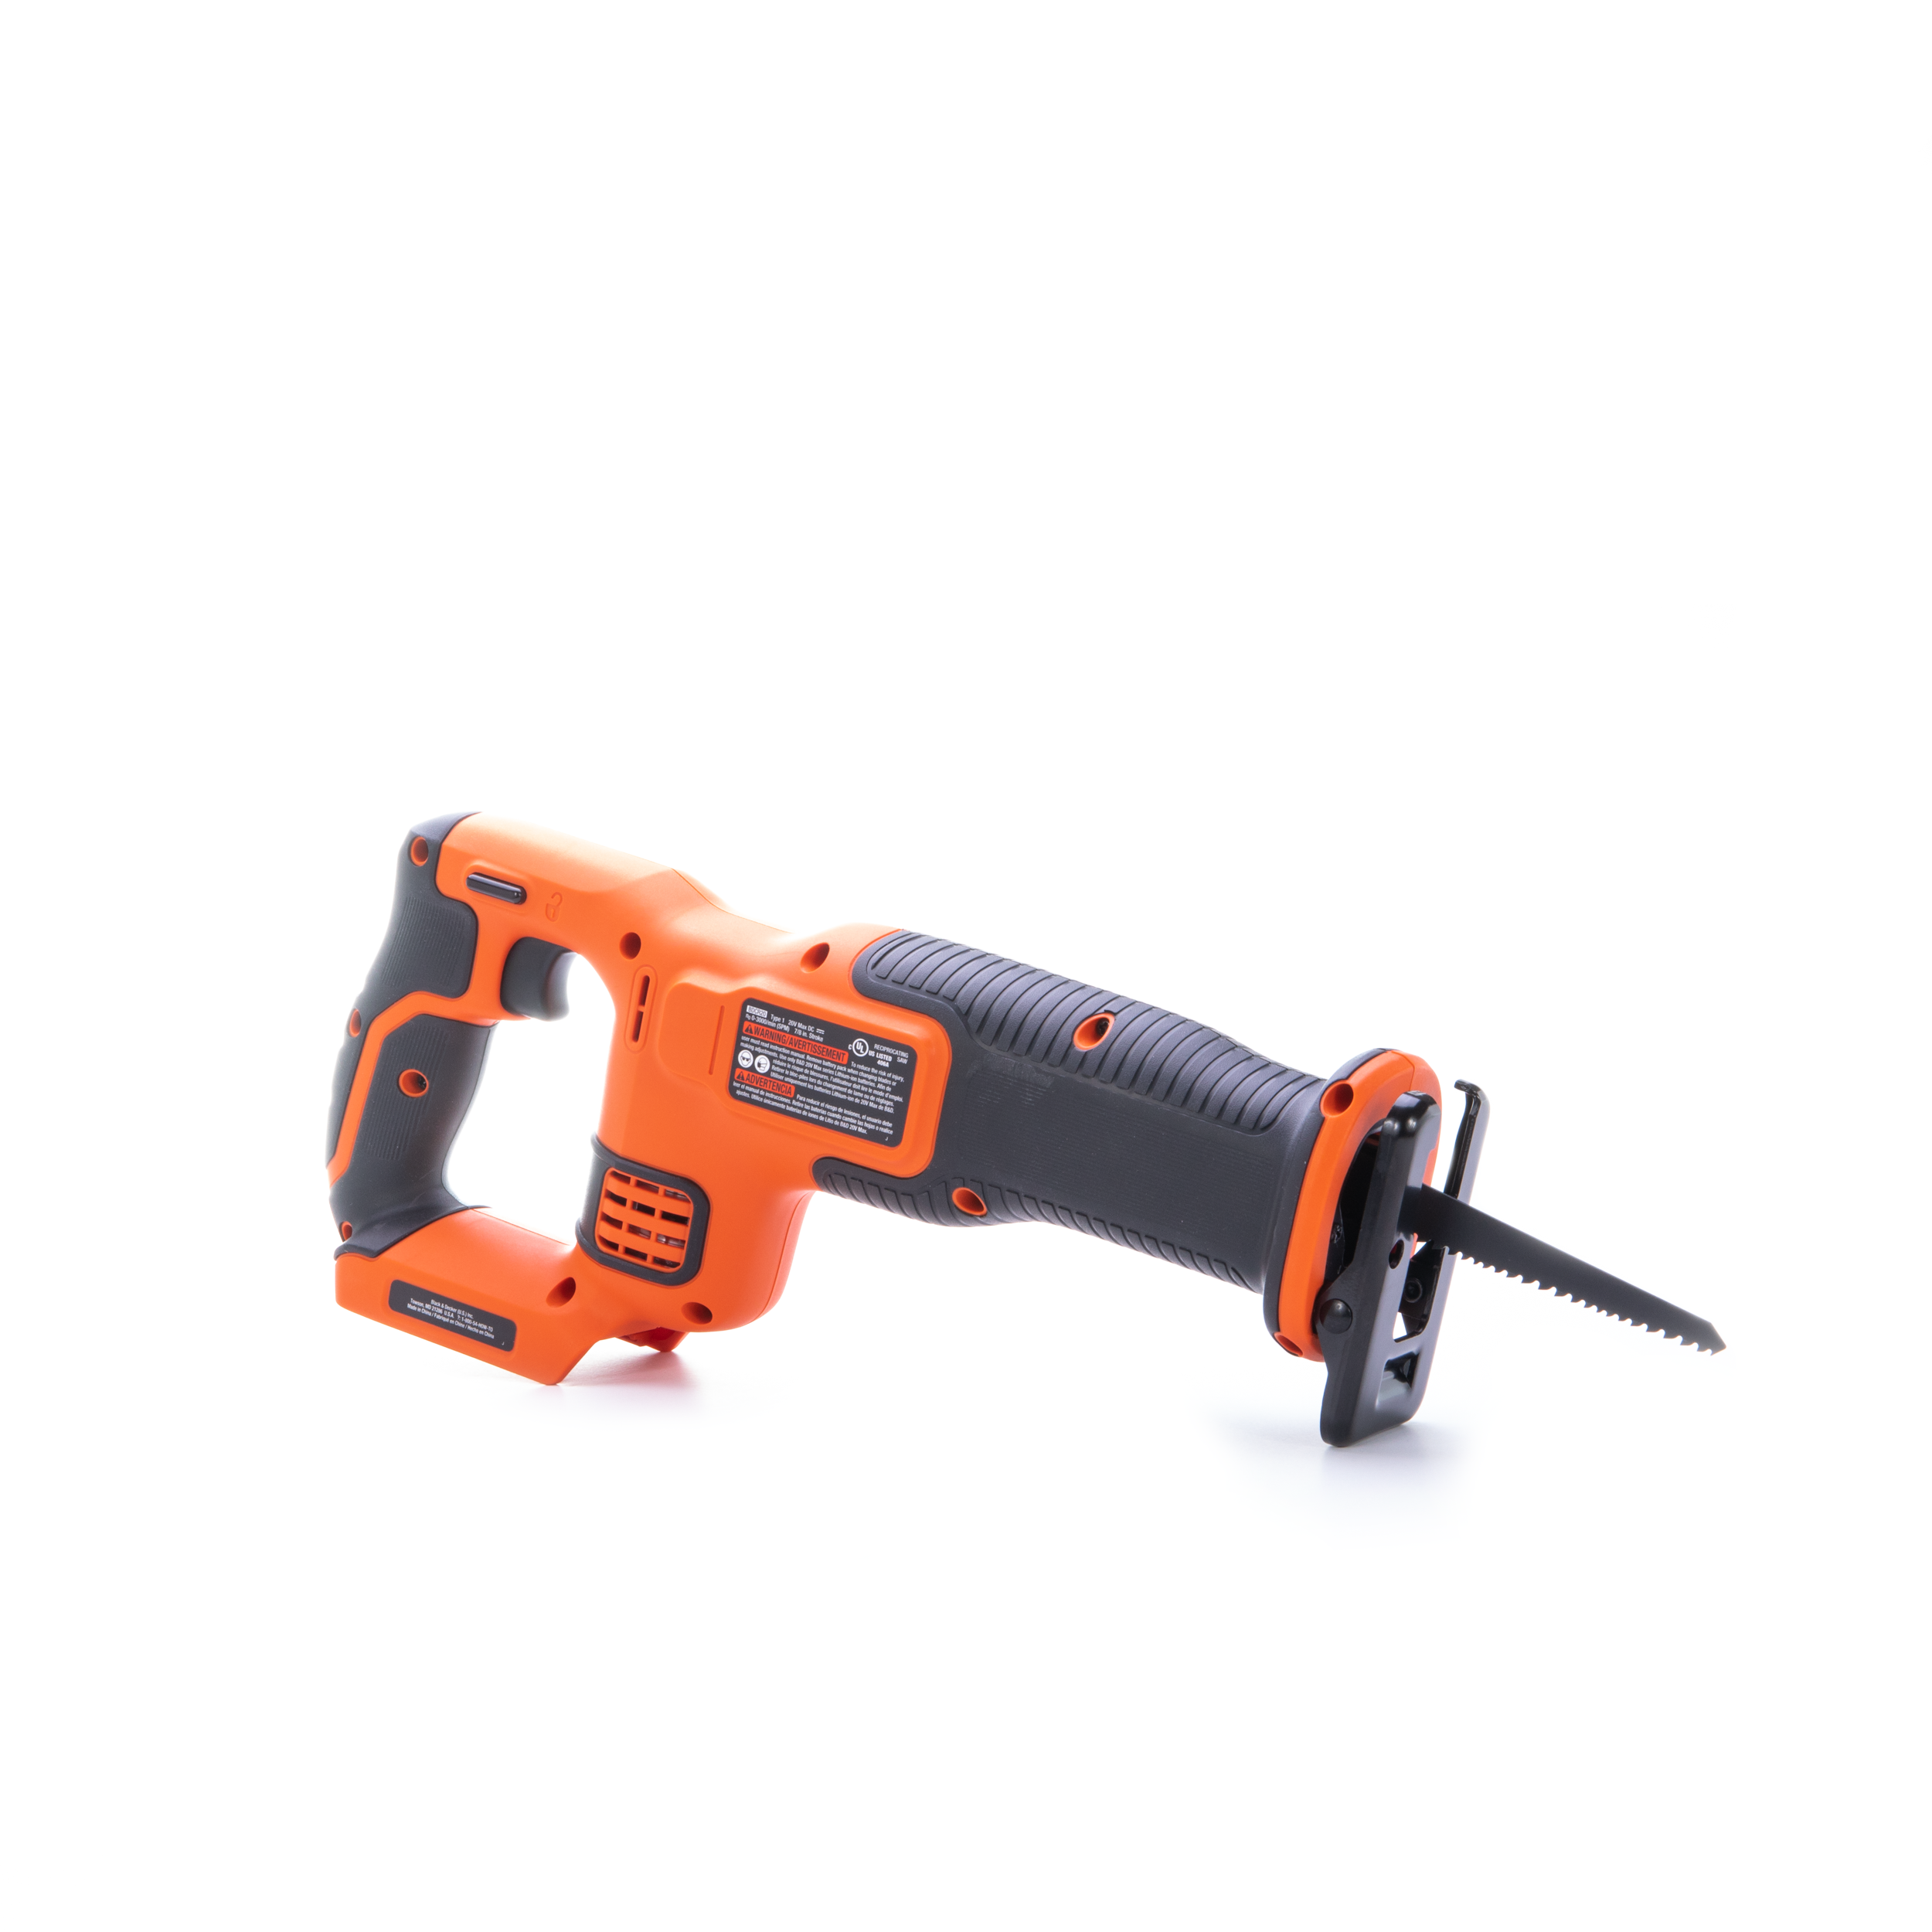 20V Max* Powerconnect 7/8 In. Cordless Reciprocating Saw BLACK+DECKER